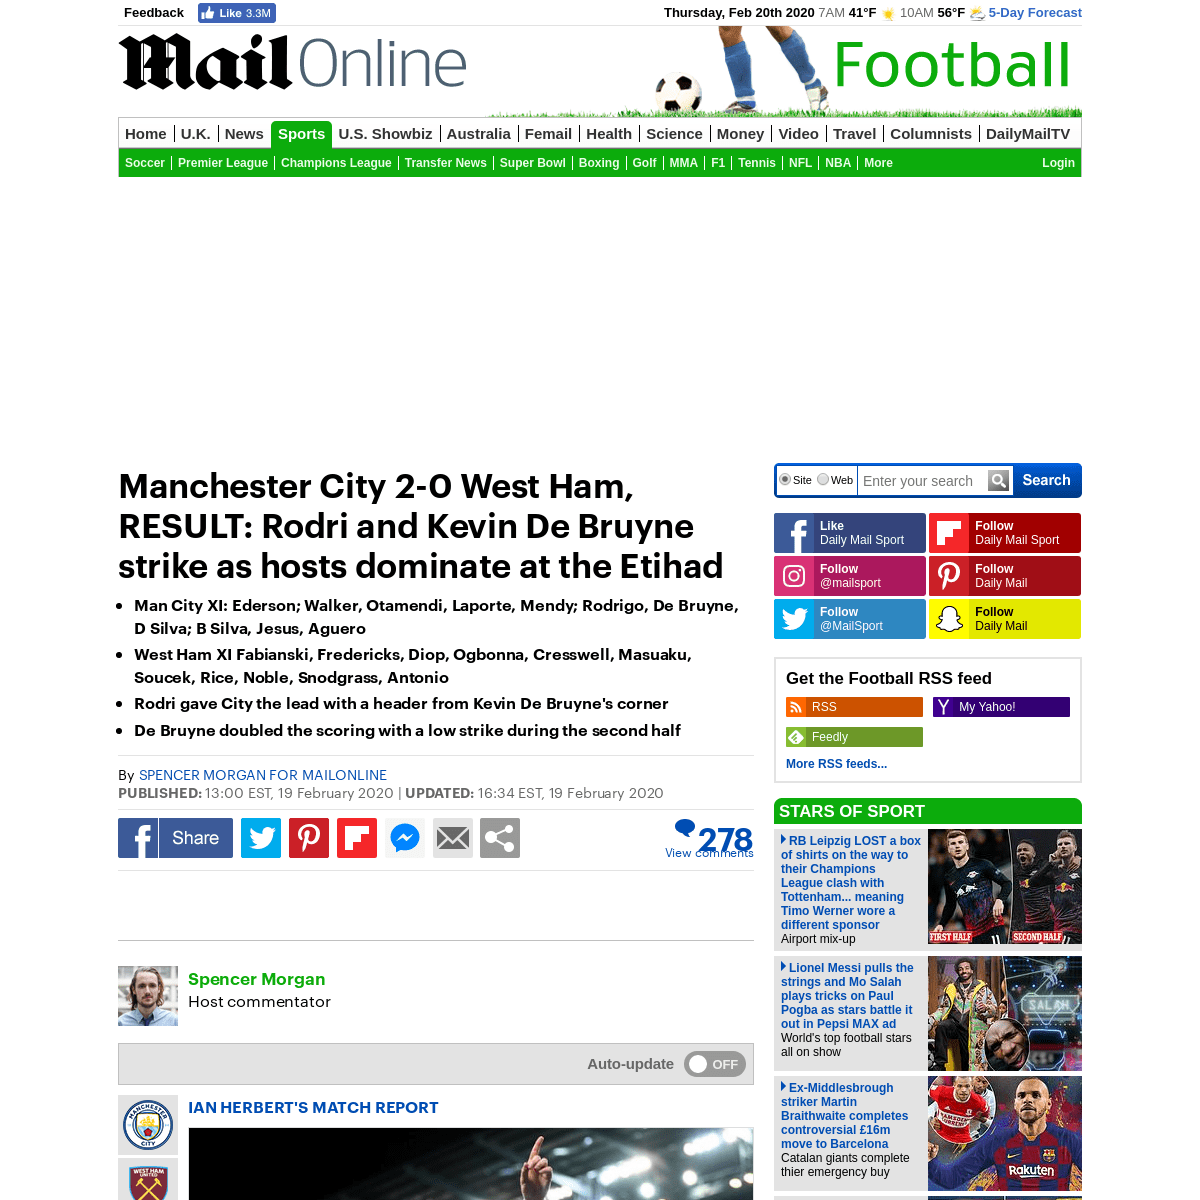 A complete backup of www.dailymail.co.uk/sport/football/article-8021131/Manchester-City-vs-West-Ham-Premier-League-2019-20-Live-